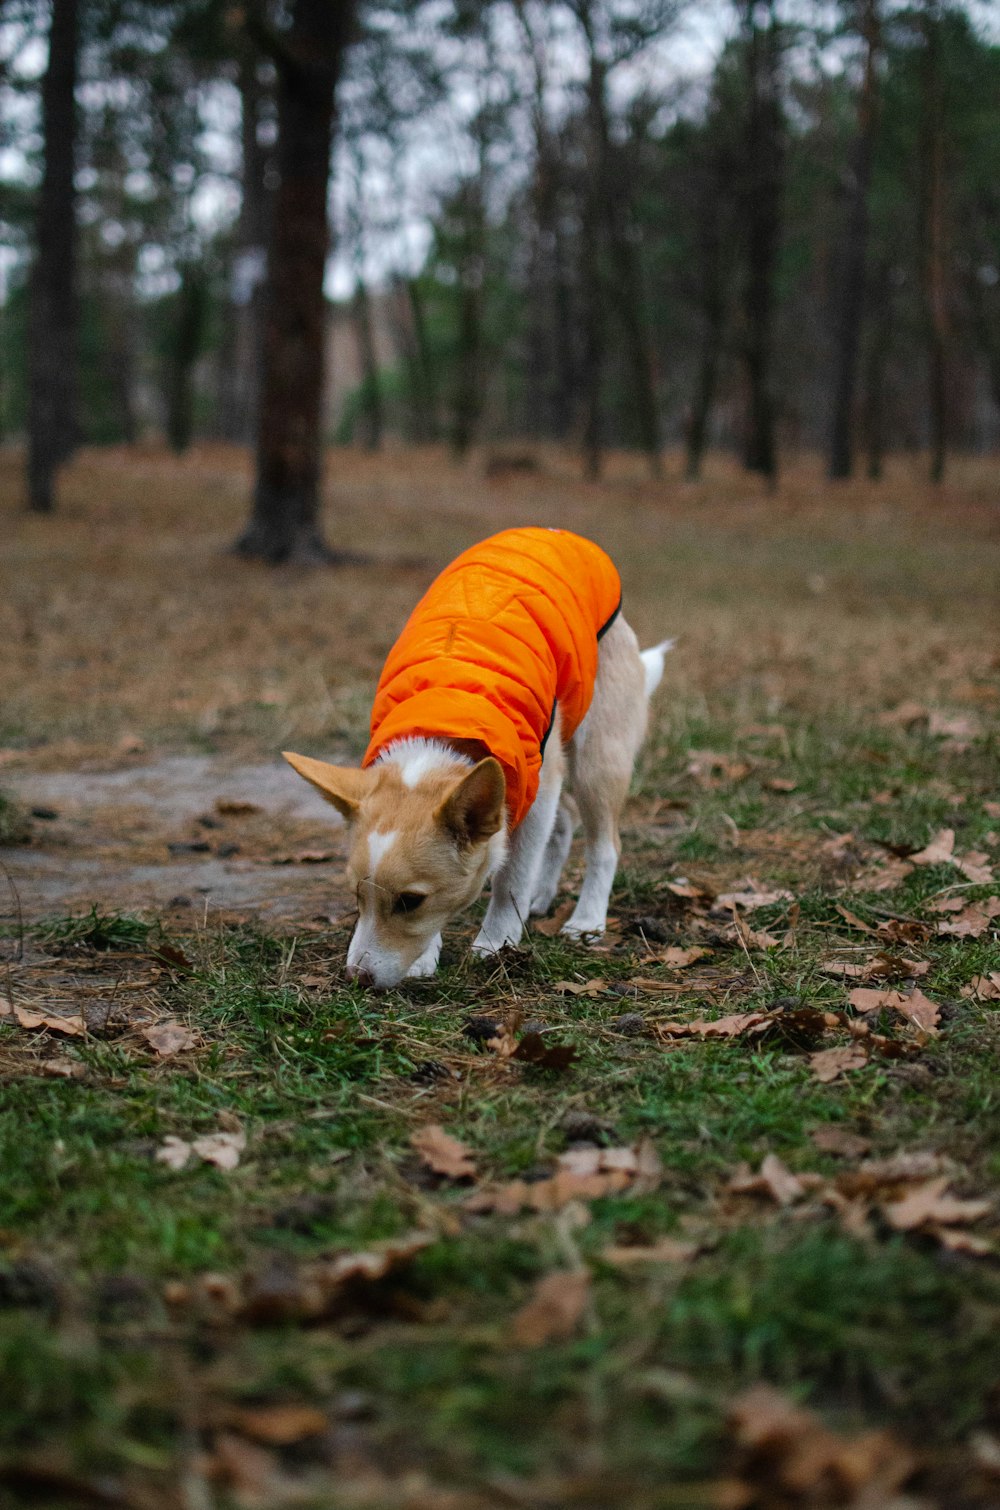 a small dog wearing an orange jacket in the woods